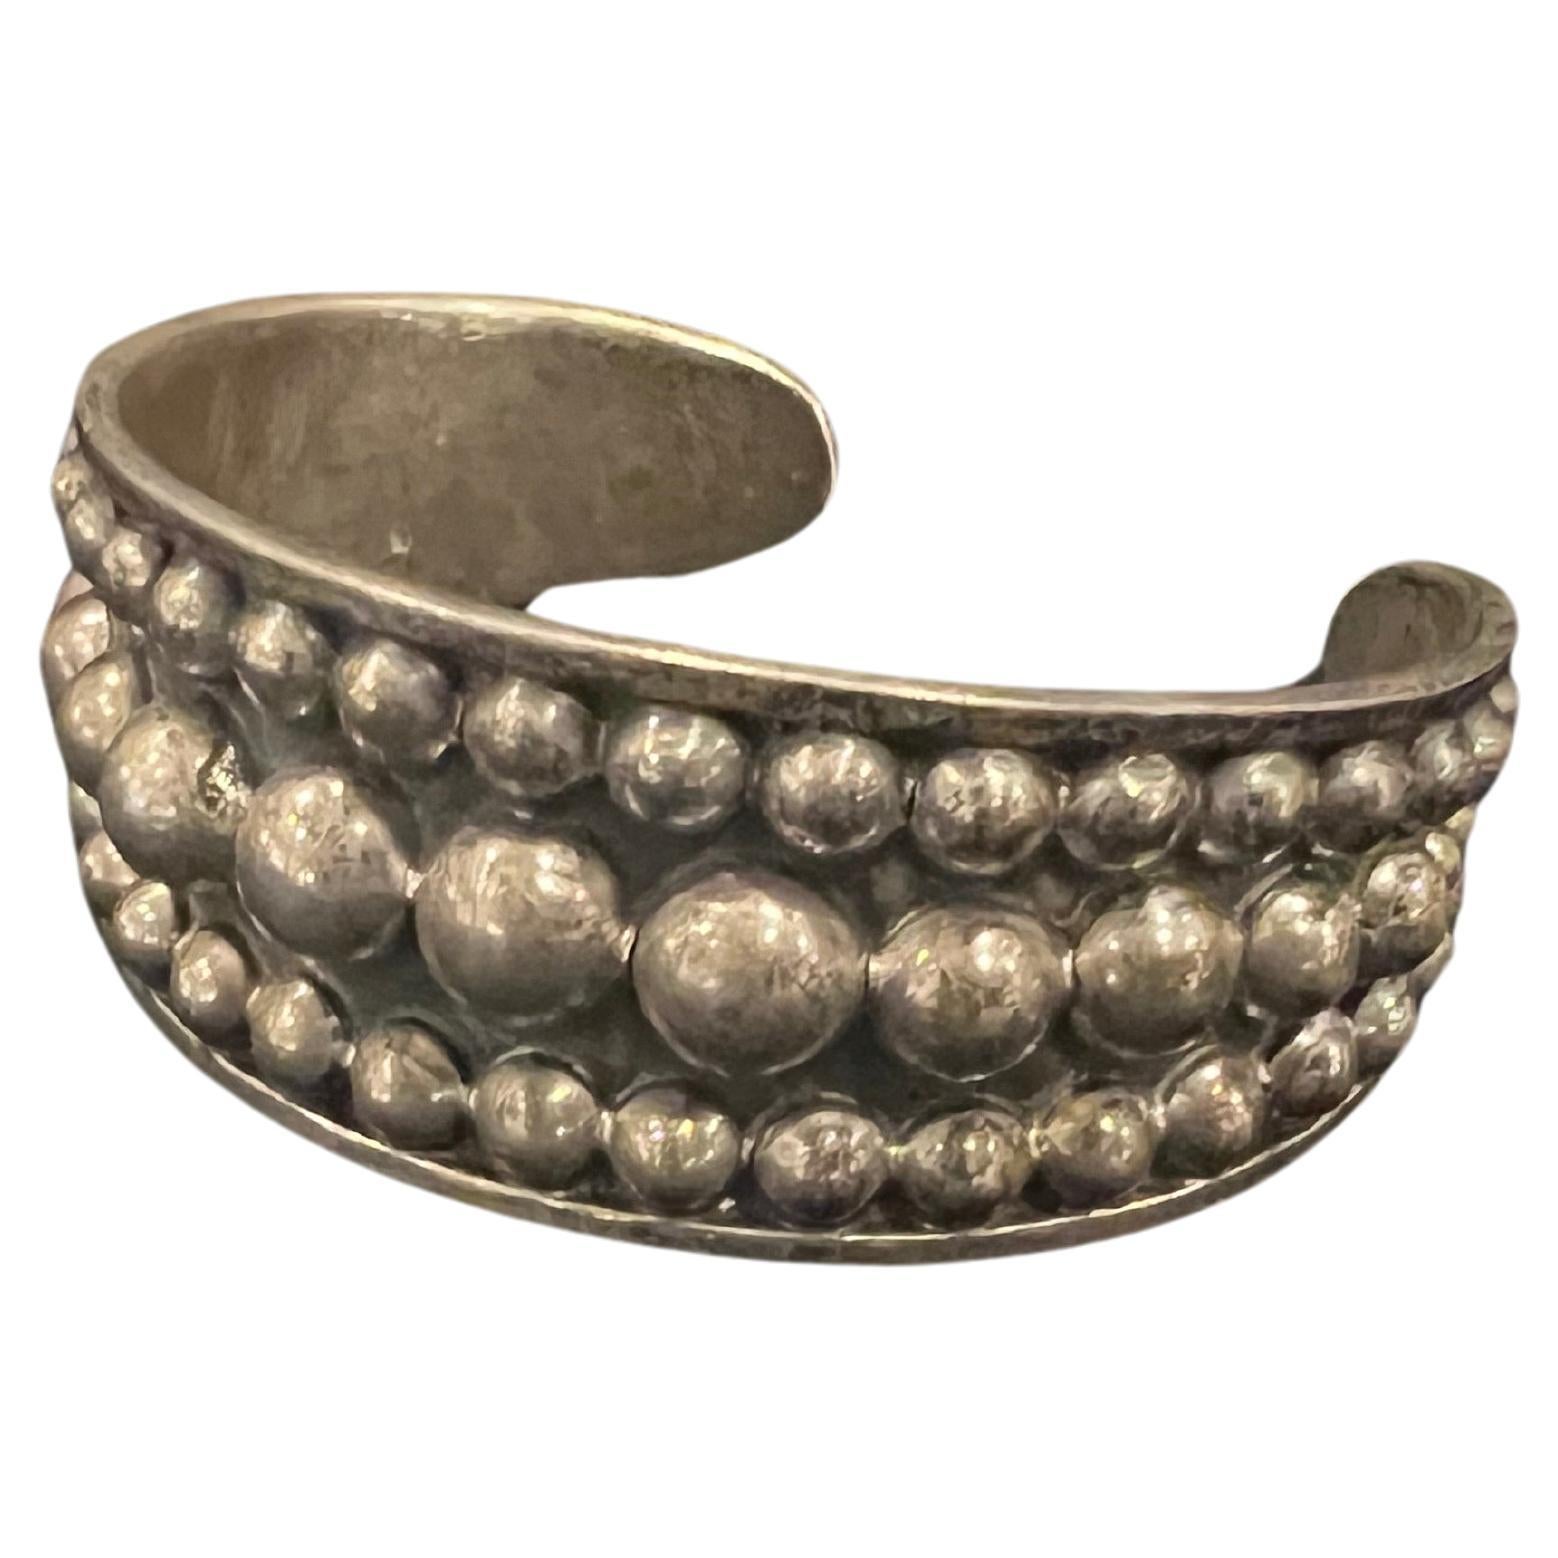 Hand-Crafted Mexican Abstract Brutalist Modernist Bracelet 925 Sterling Silver Cuff, 1960s For Sale